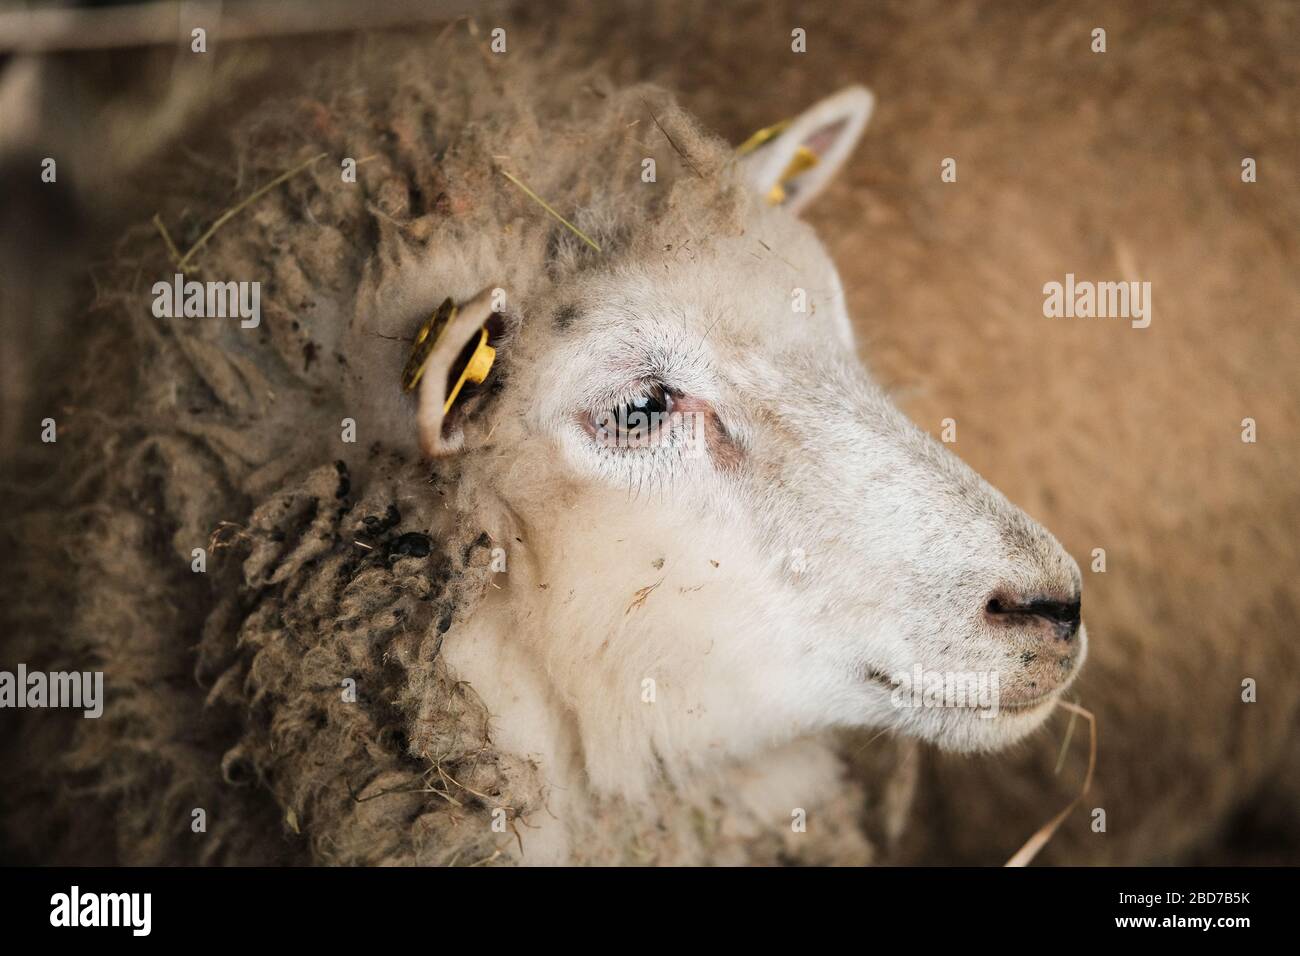 side view of a sheep head, sheep portrait Stock Photo